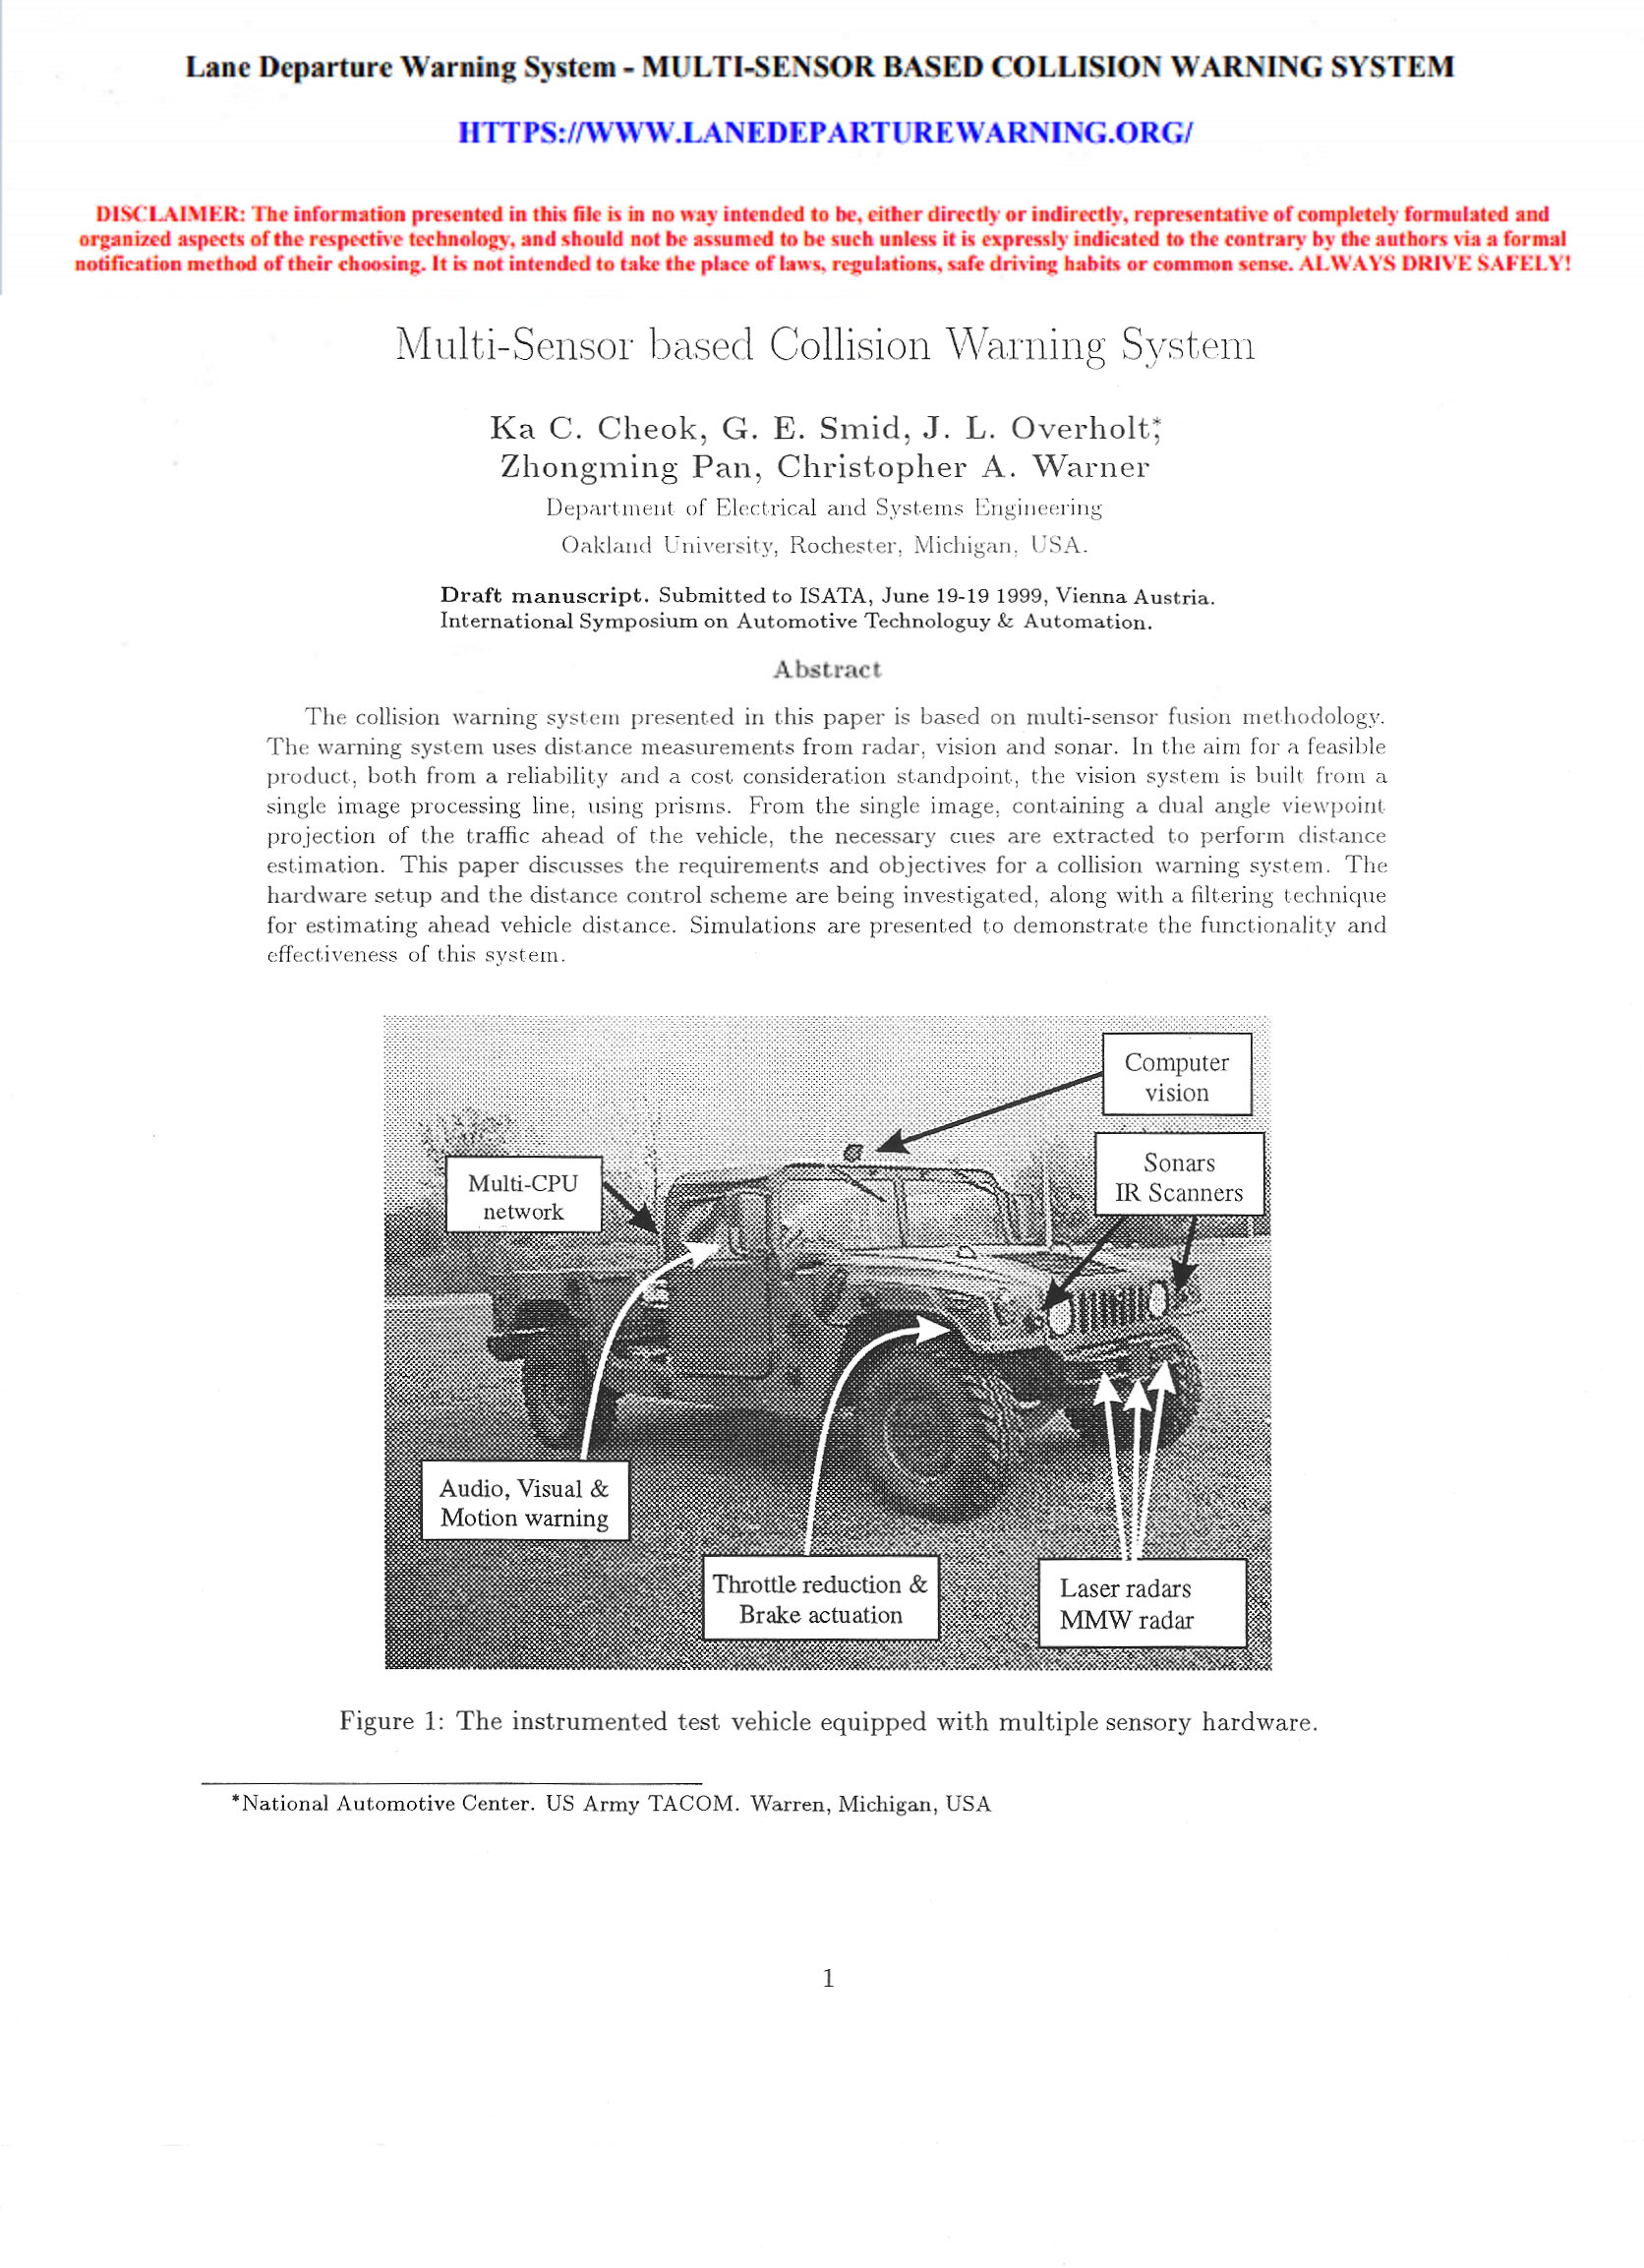 Title and abstract page of "Multi-Sensor based Collision Warning System"